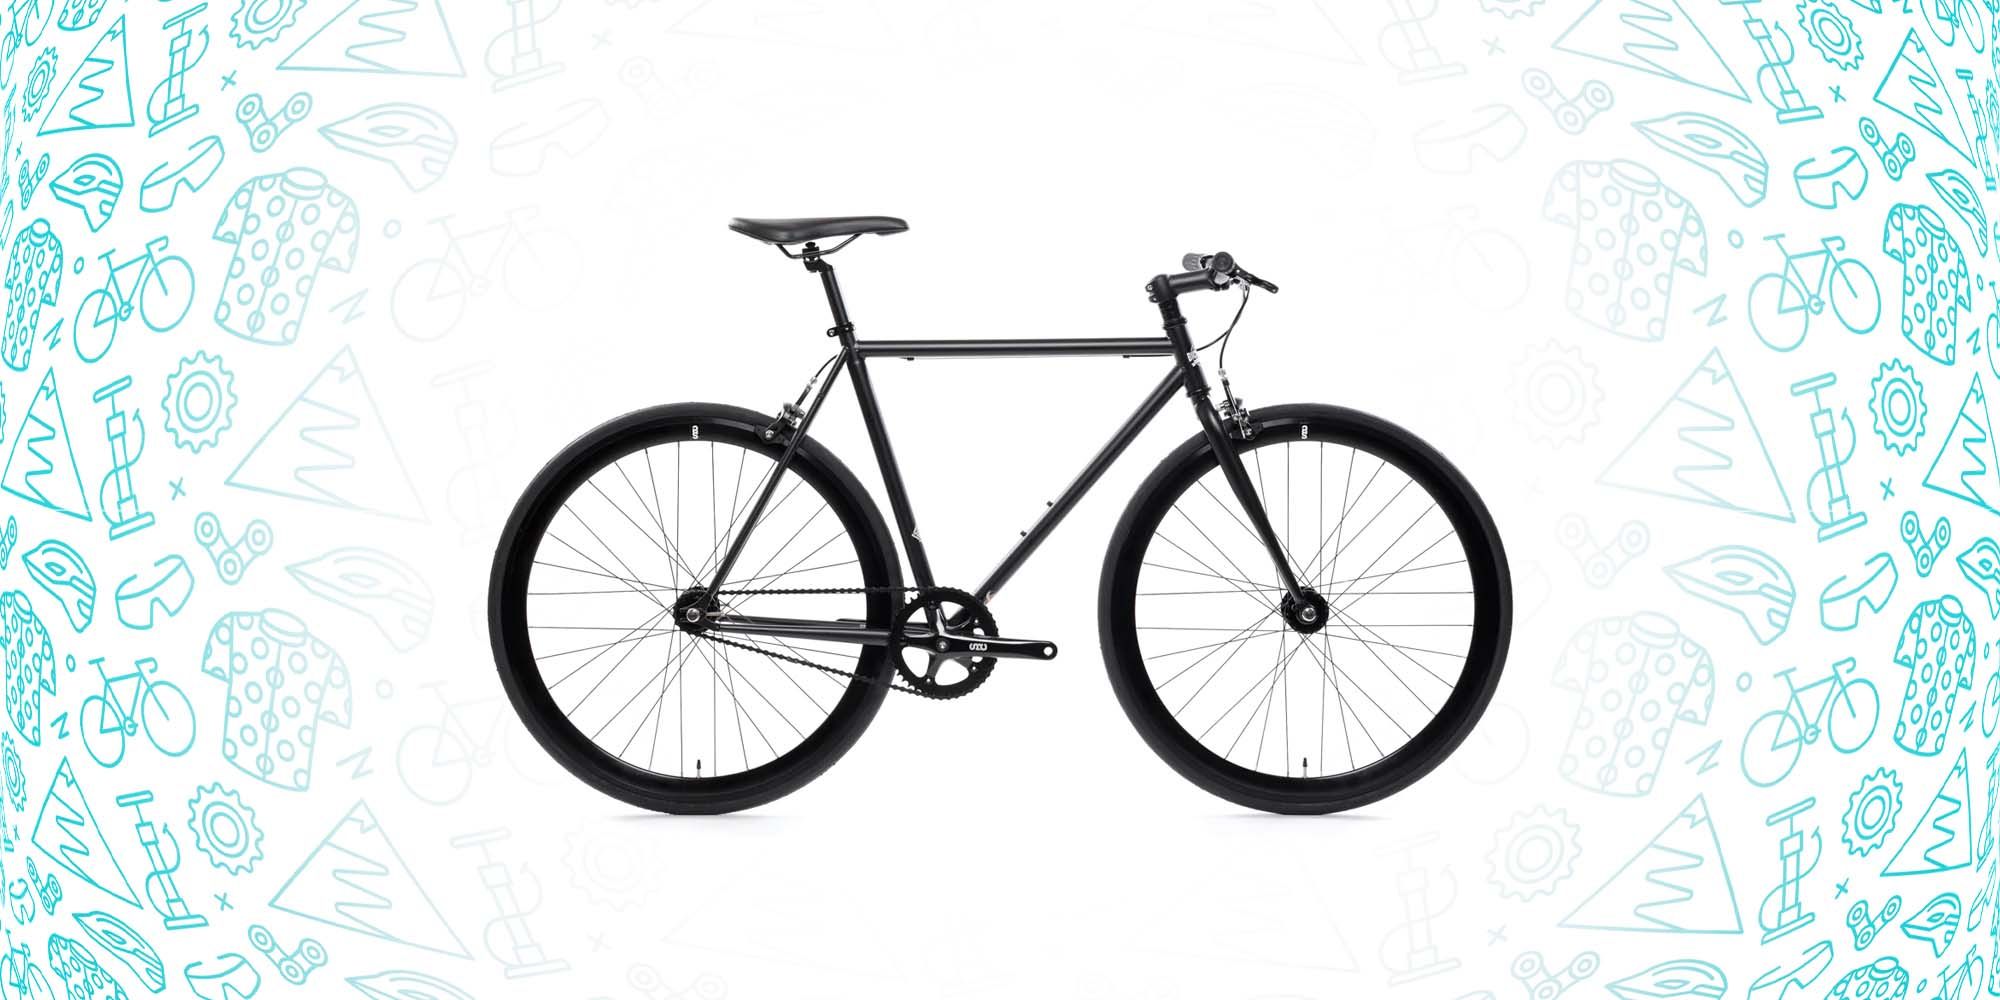 Which handlebars are best for fixed gear and single speed riding?